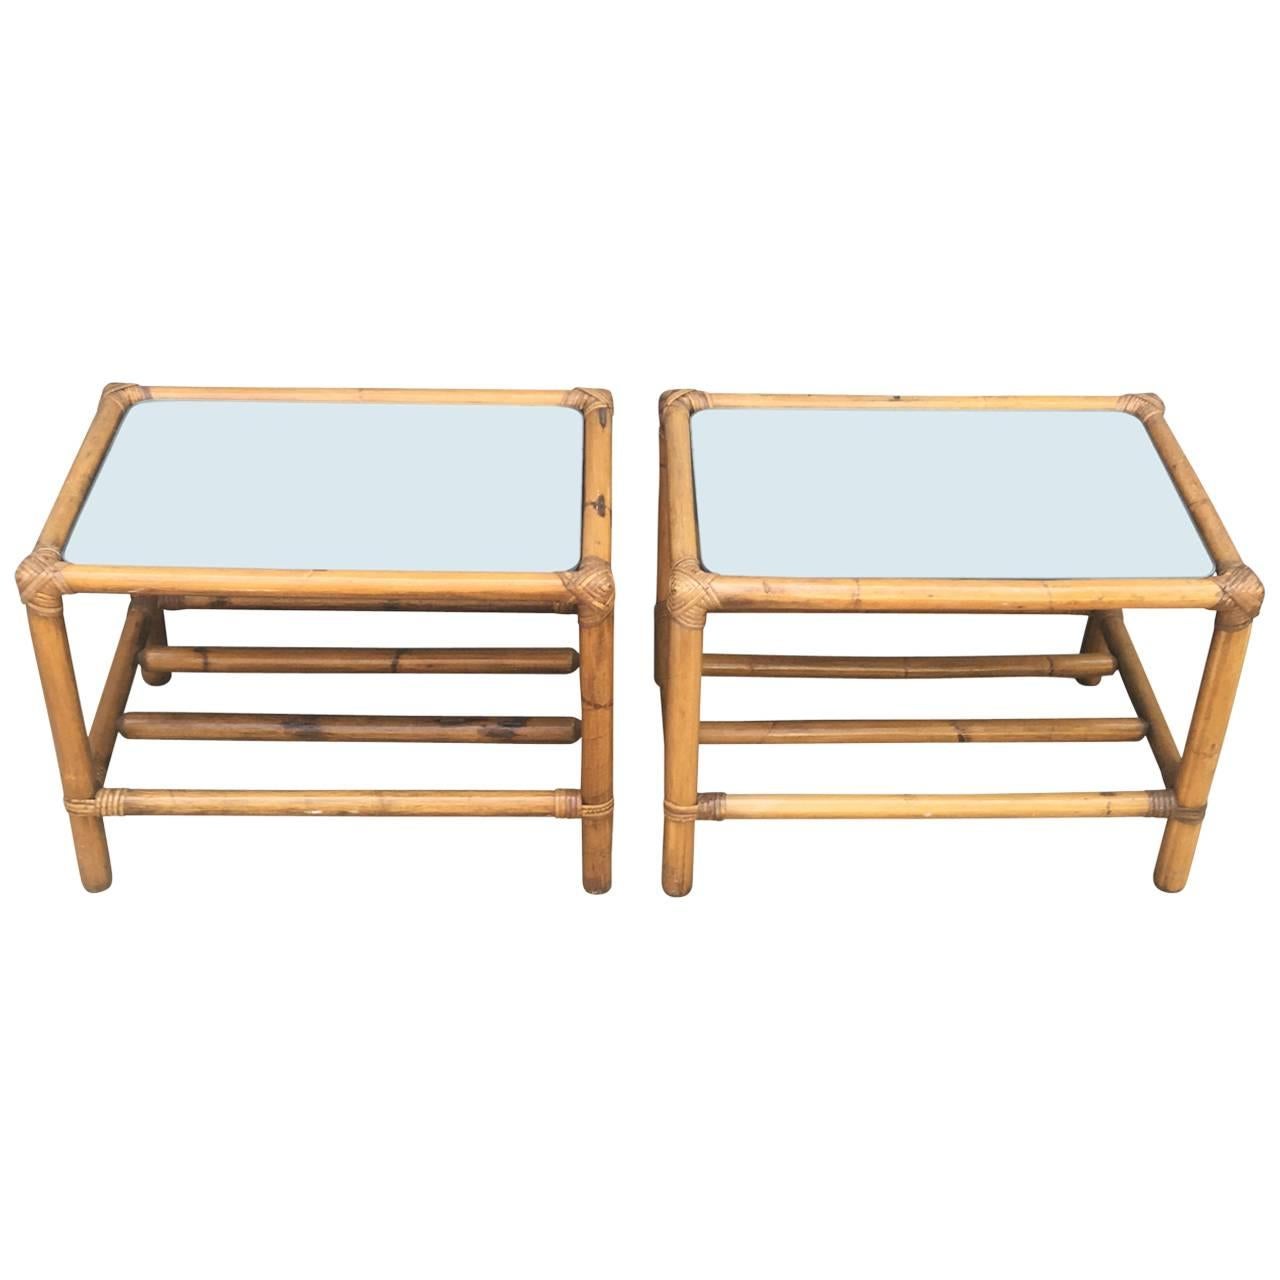 Charming pair of two-tier tables each with a mirror glass tops.